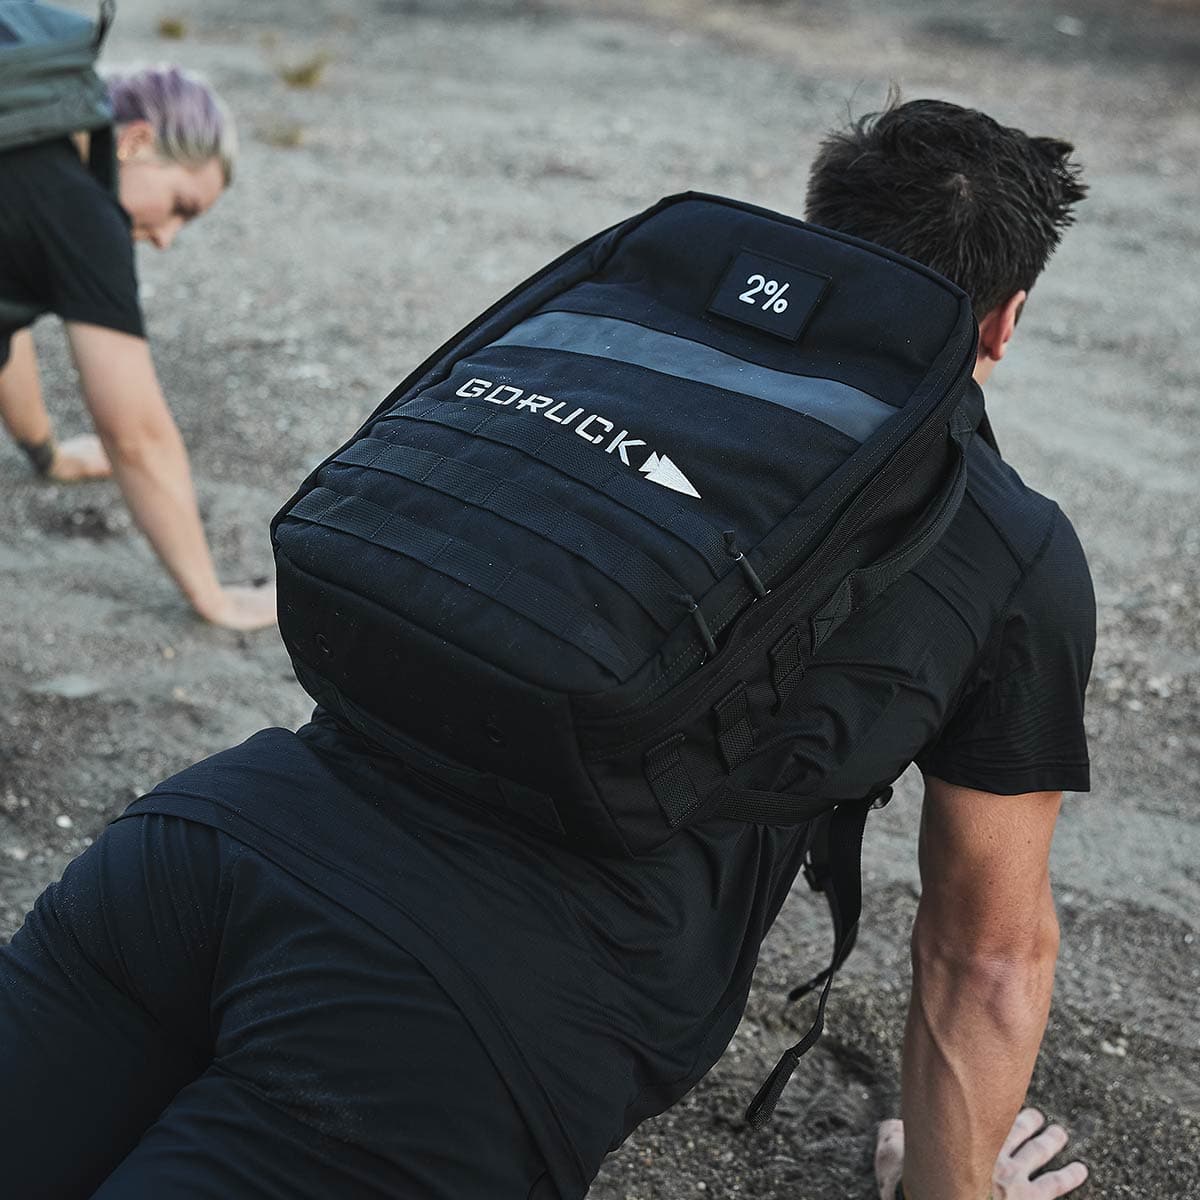 3V padded hip belt works great with the Goruck Rucker 25L : r/Goruck